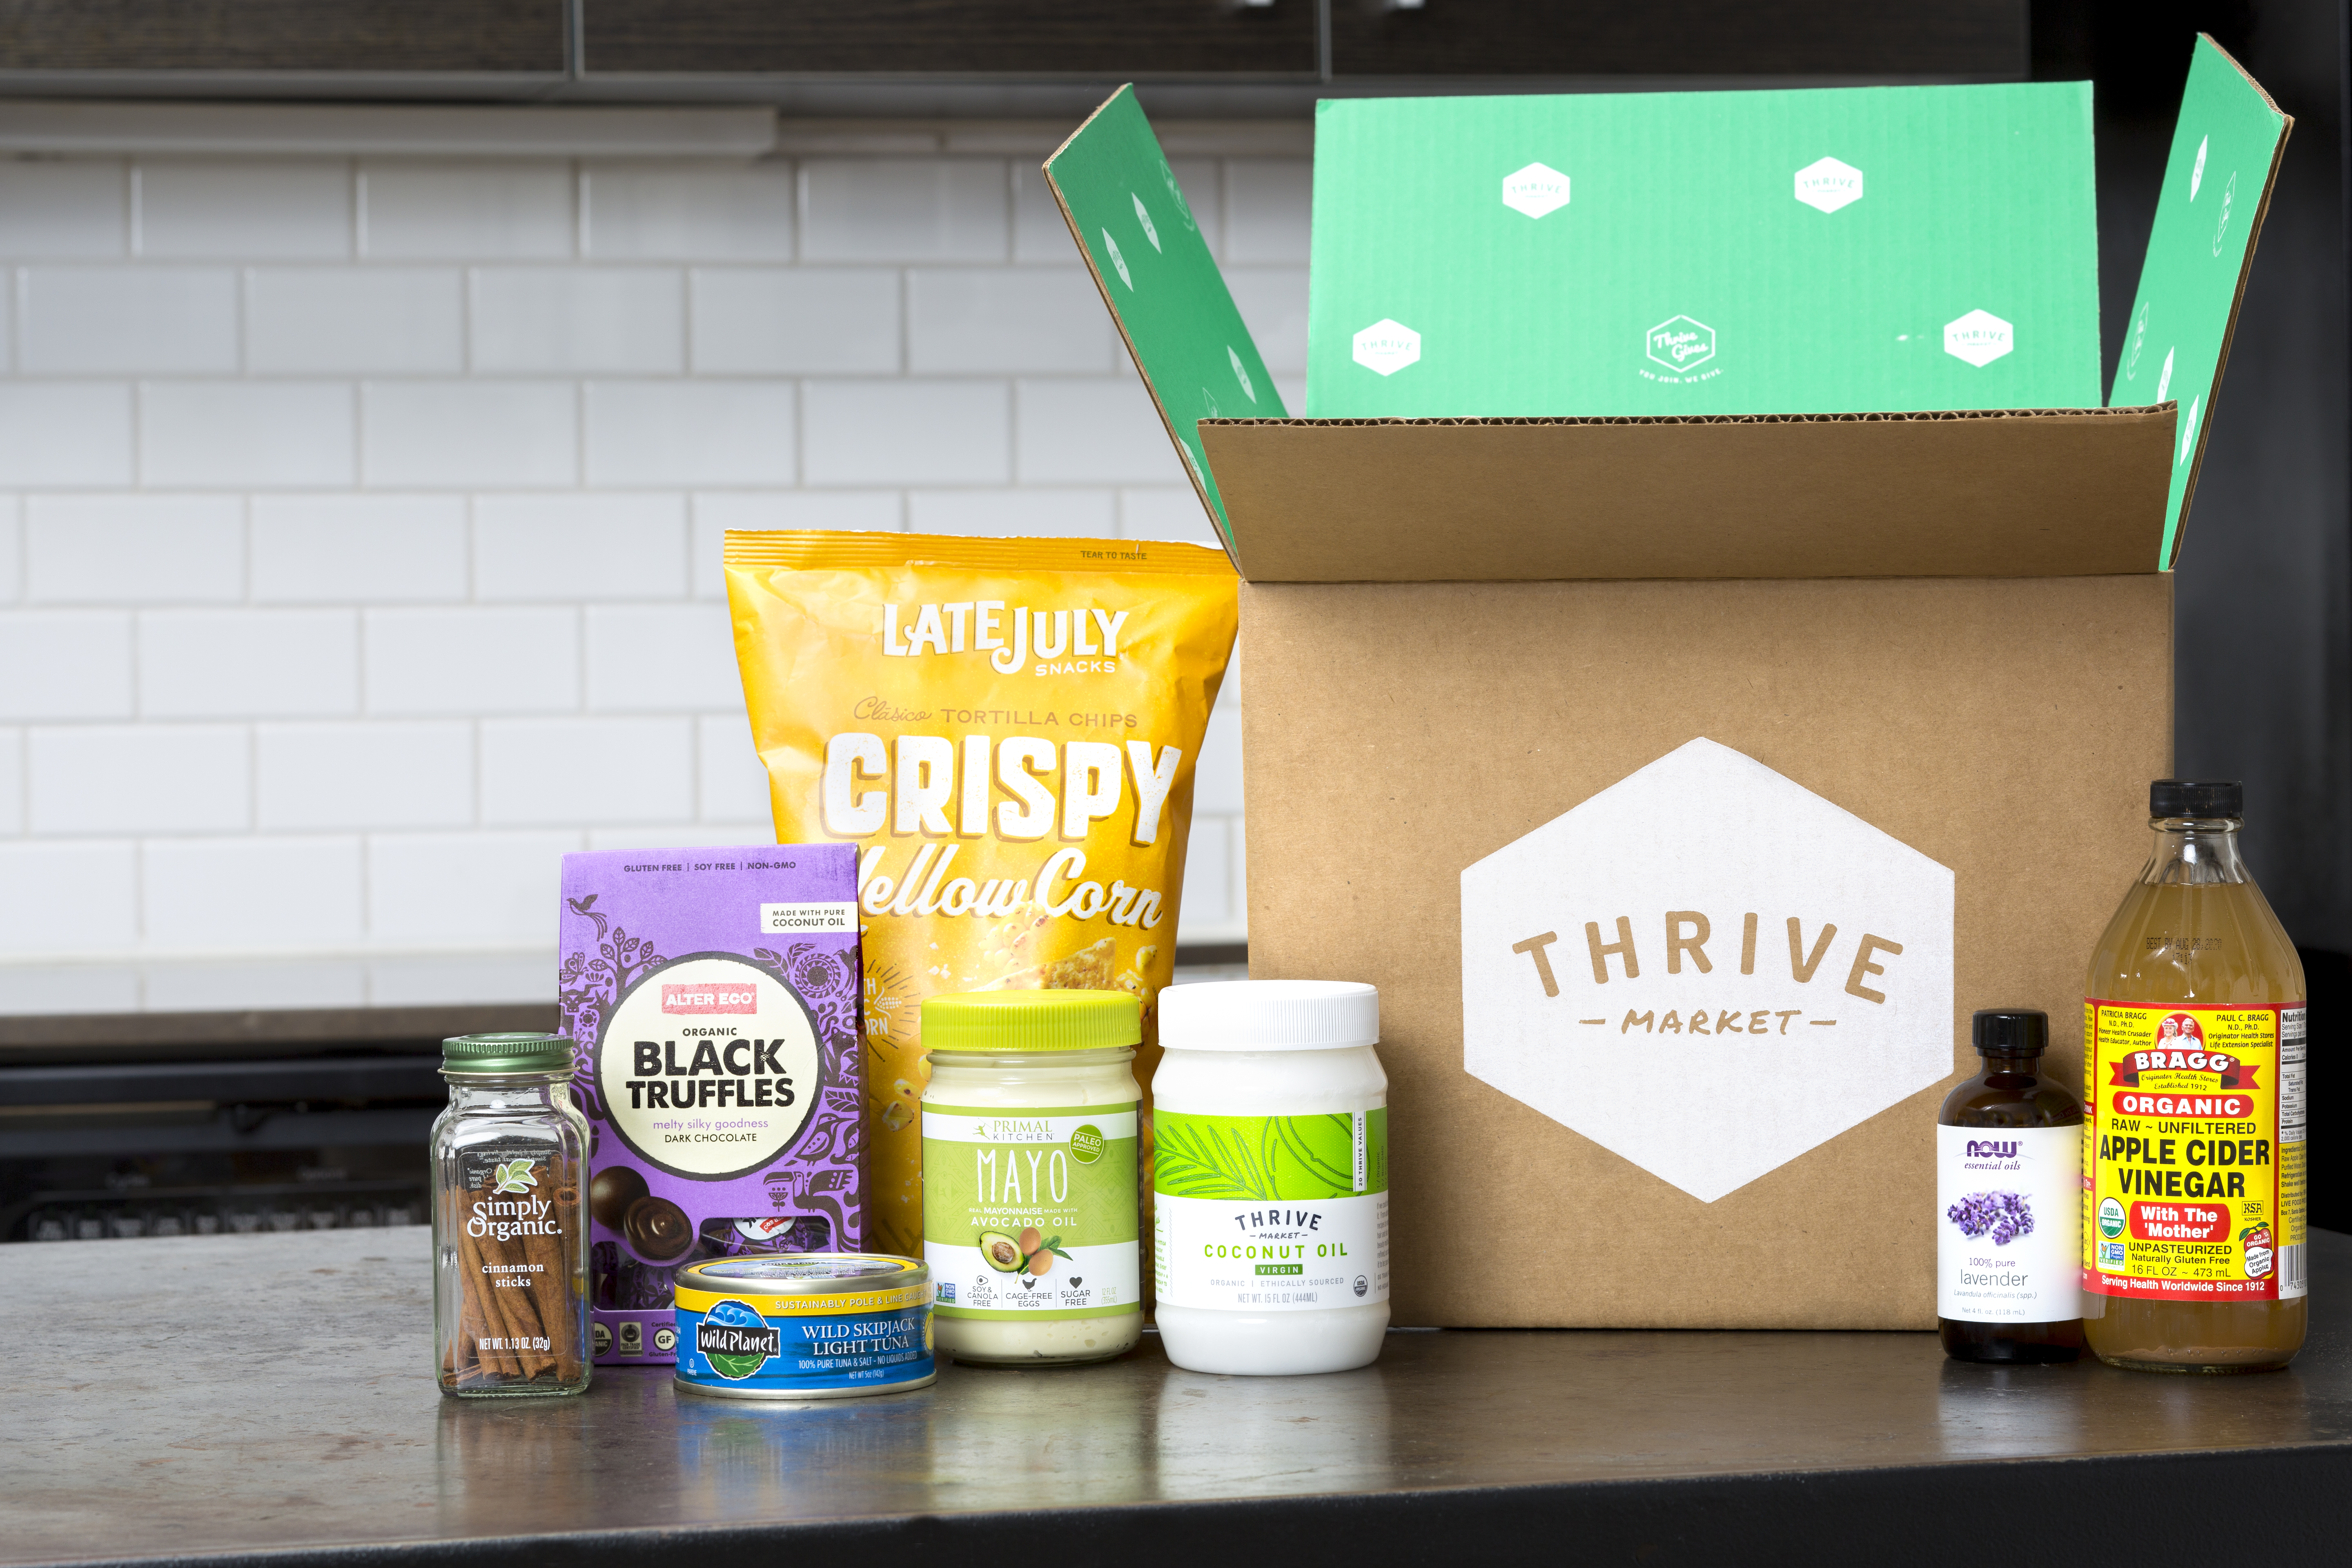 Thrive Market raises $111 million for its online organic grocery store |  TechCrunch